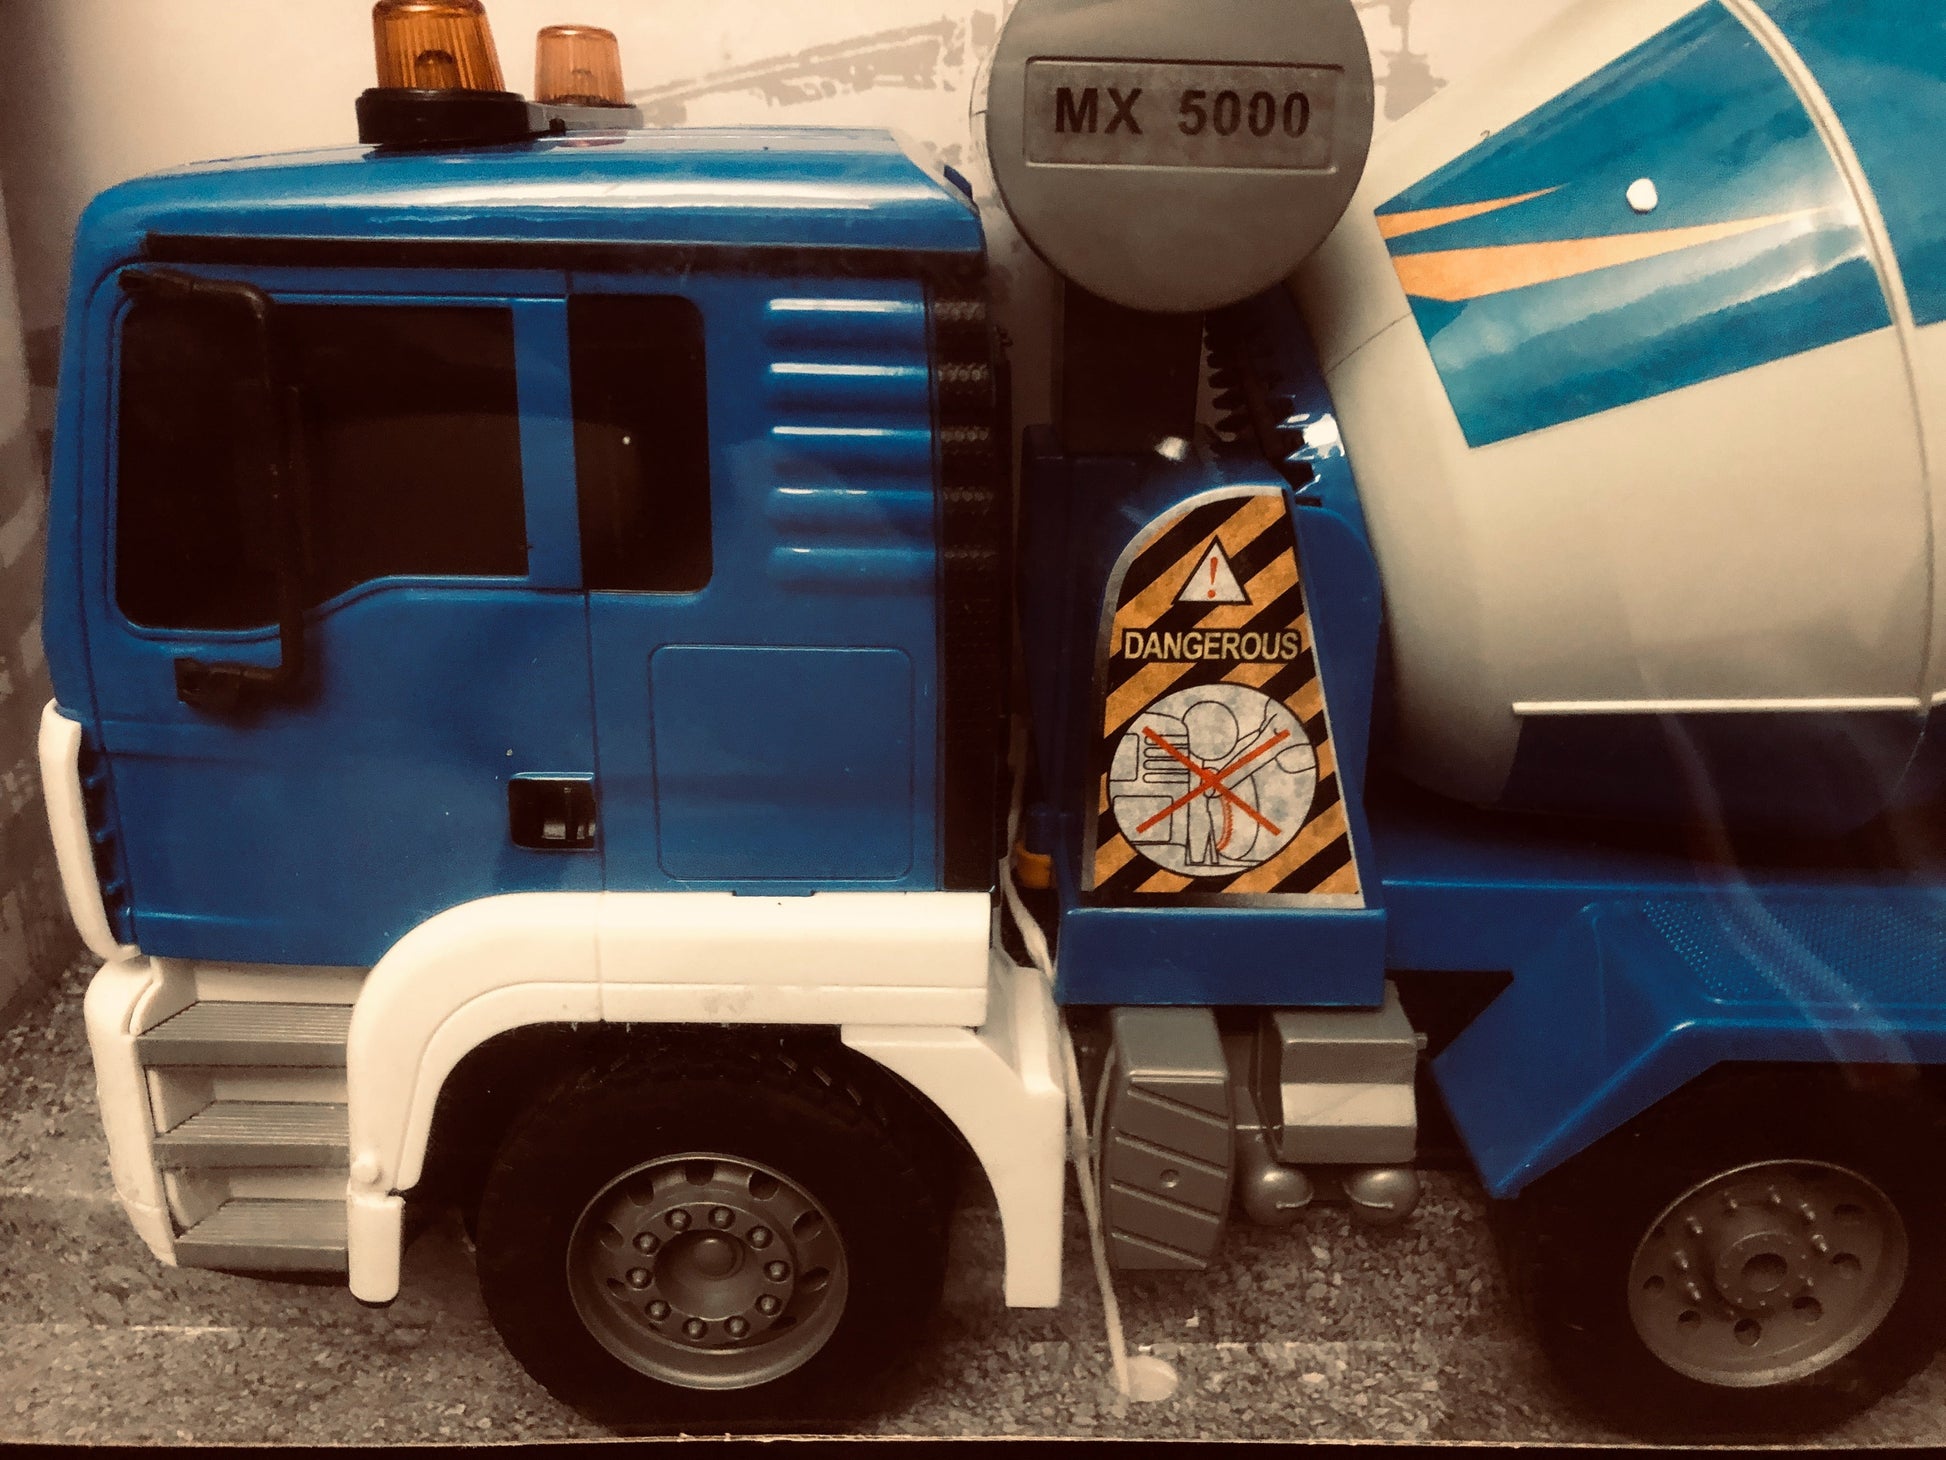  RC Truck Model Electronic 1:20 Scale RC Cement Mixer Truck